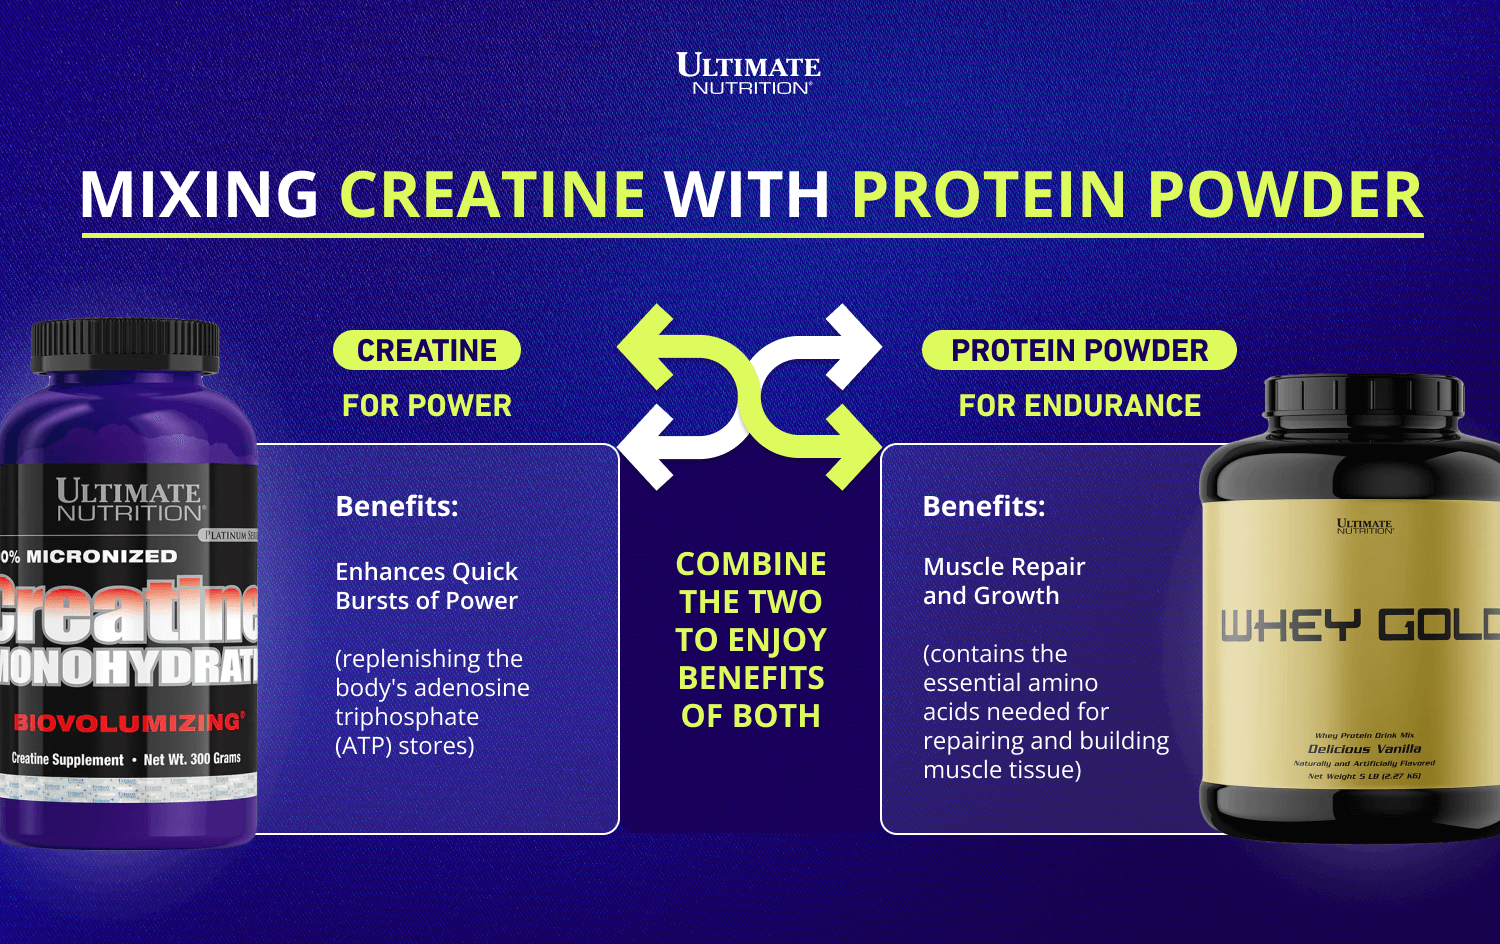 Mixing Creatine With Protein Powder Infographic